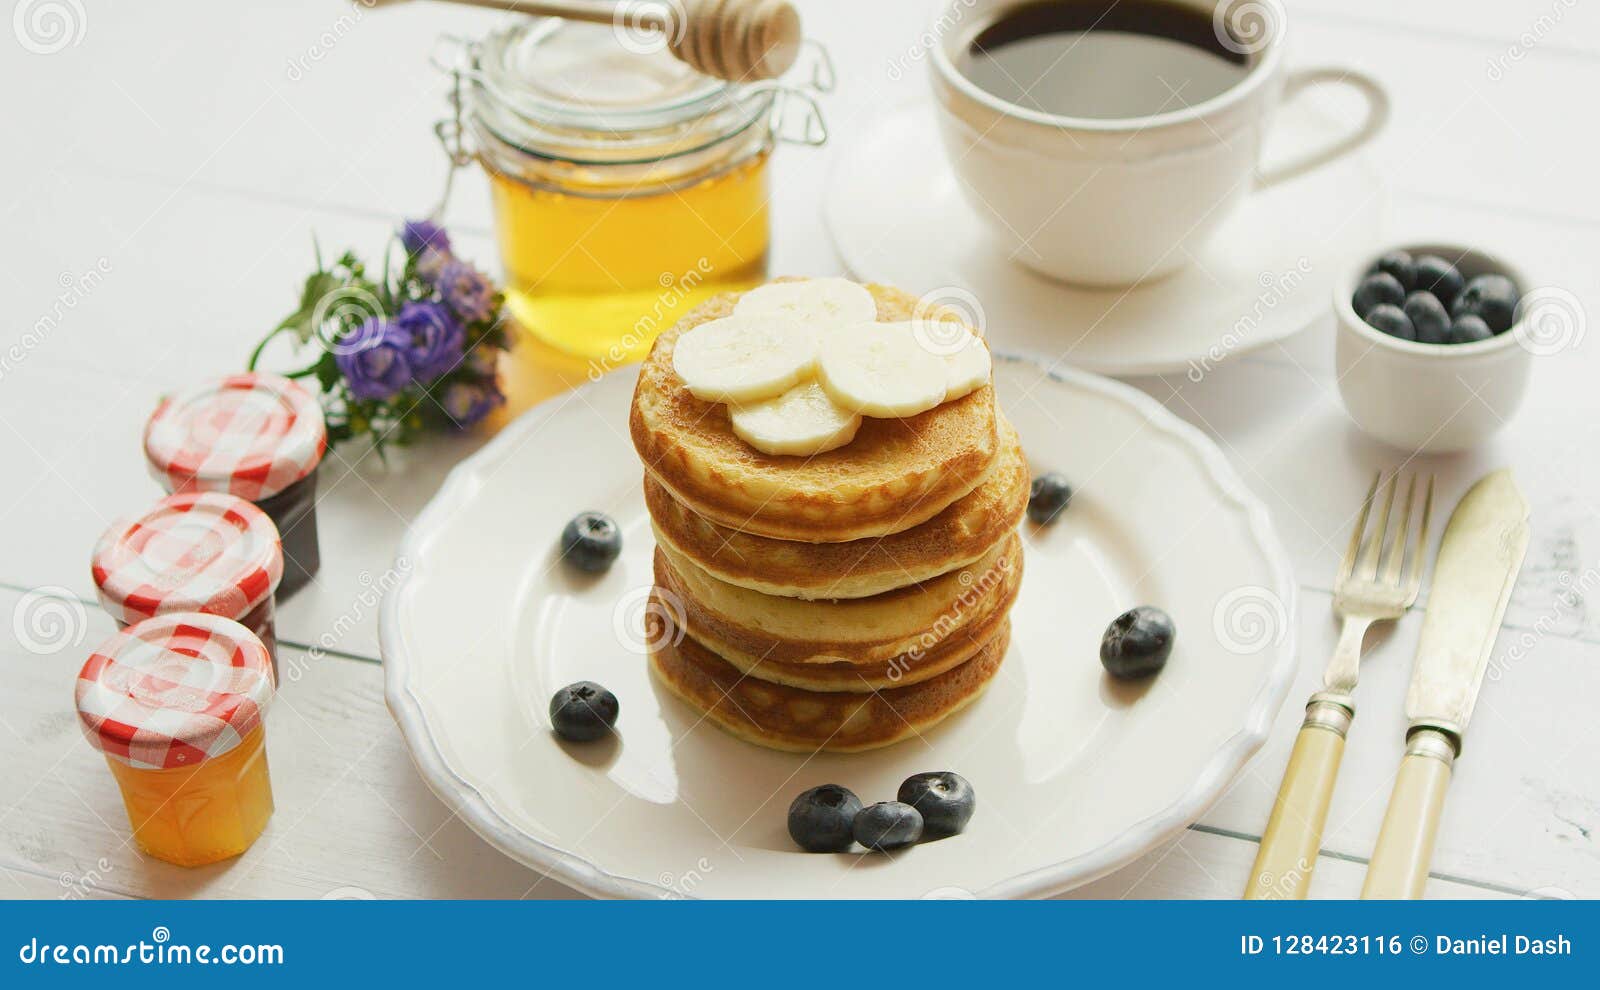 Pancakes with Slices of Banana and Berries Stock Photo - Image of food ...